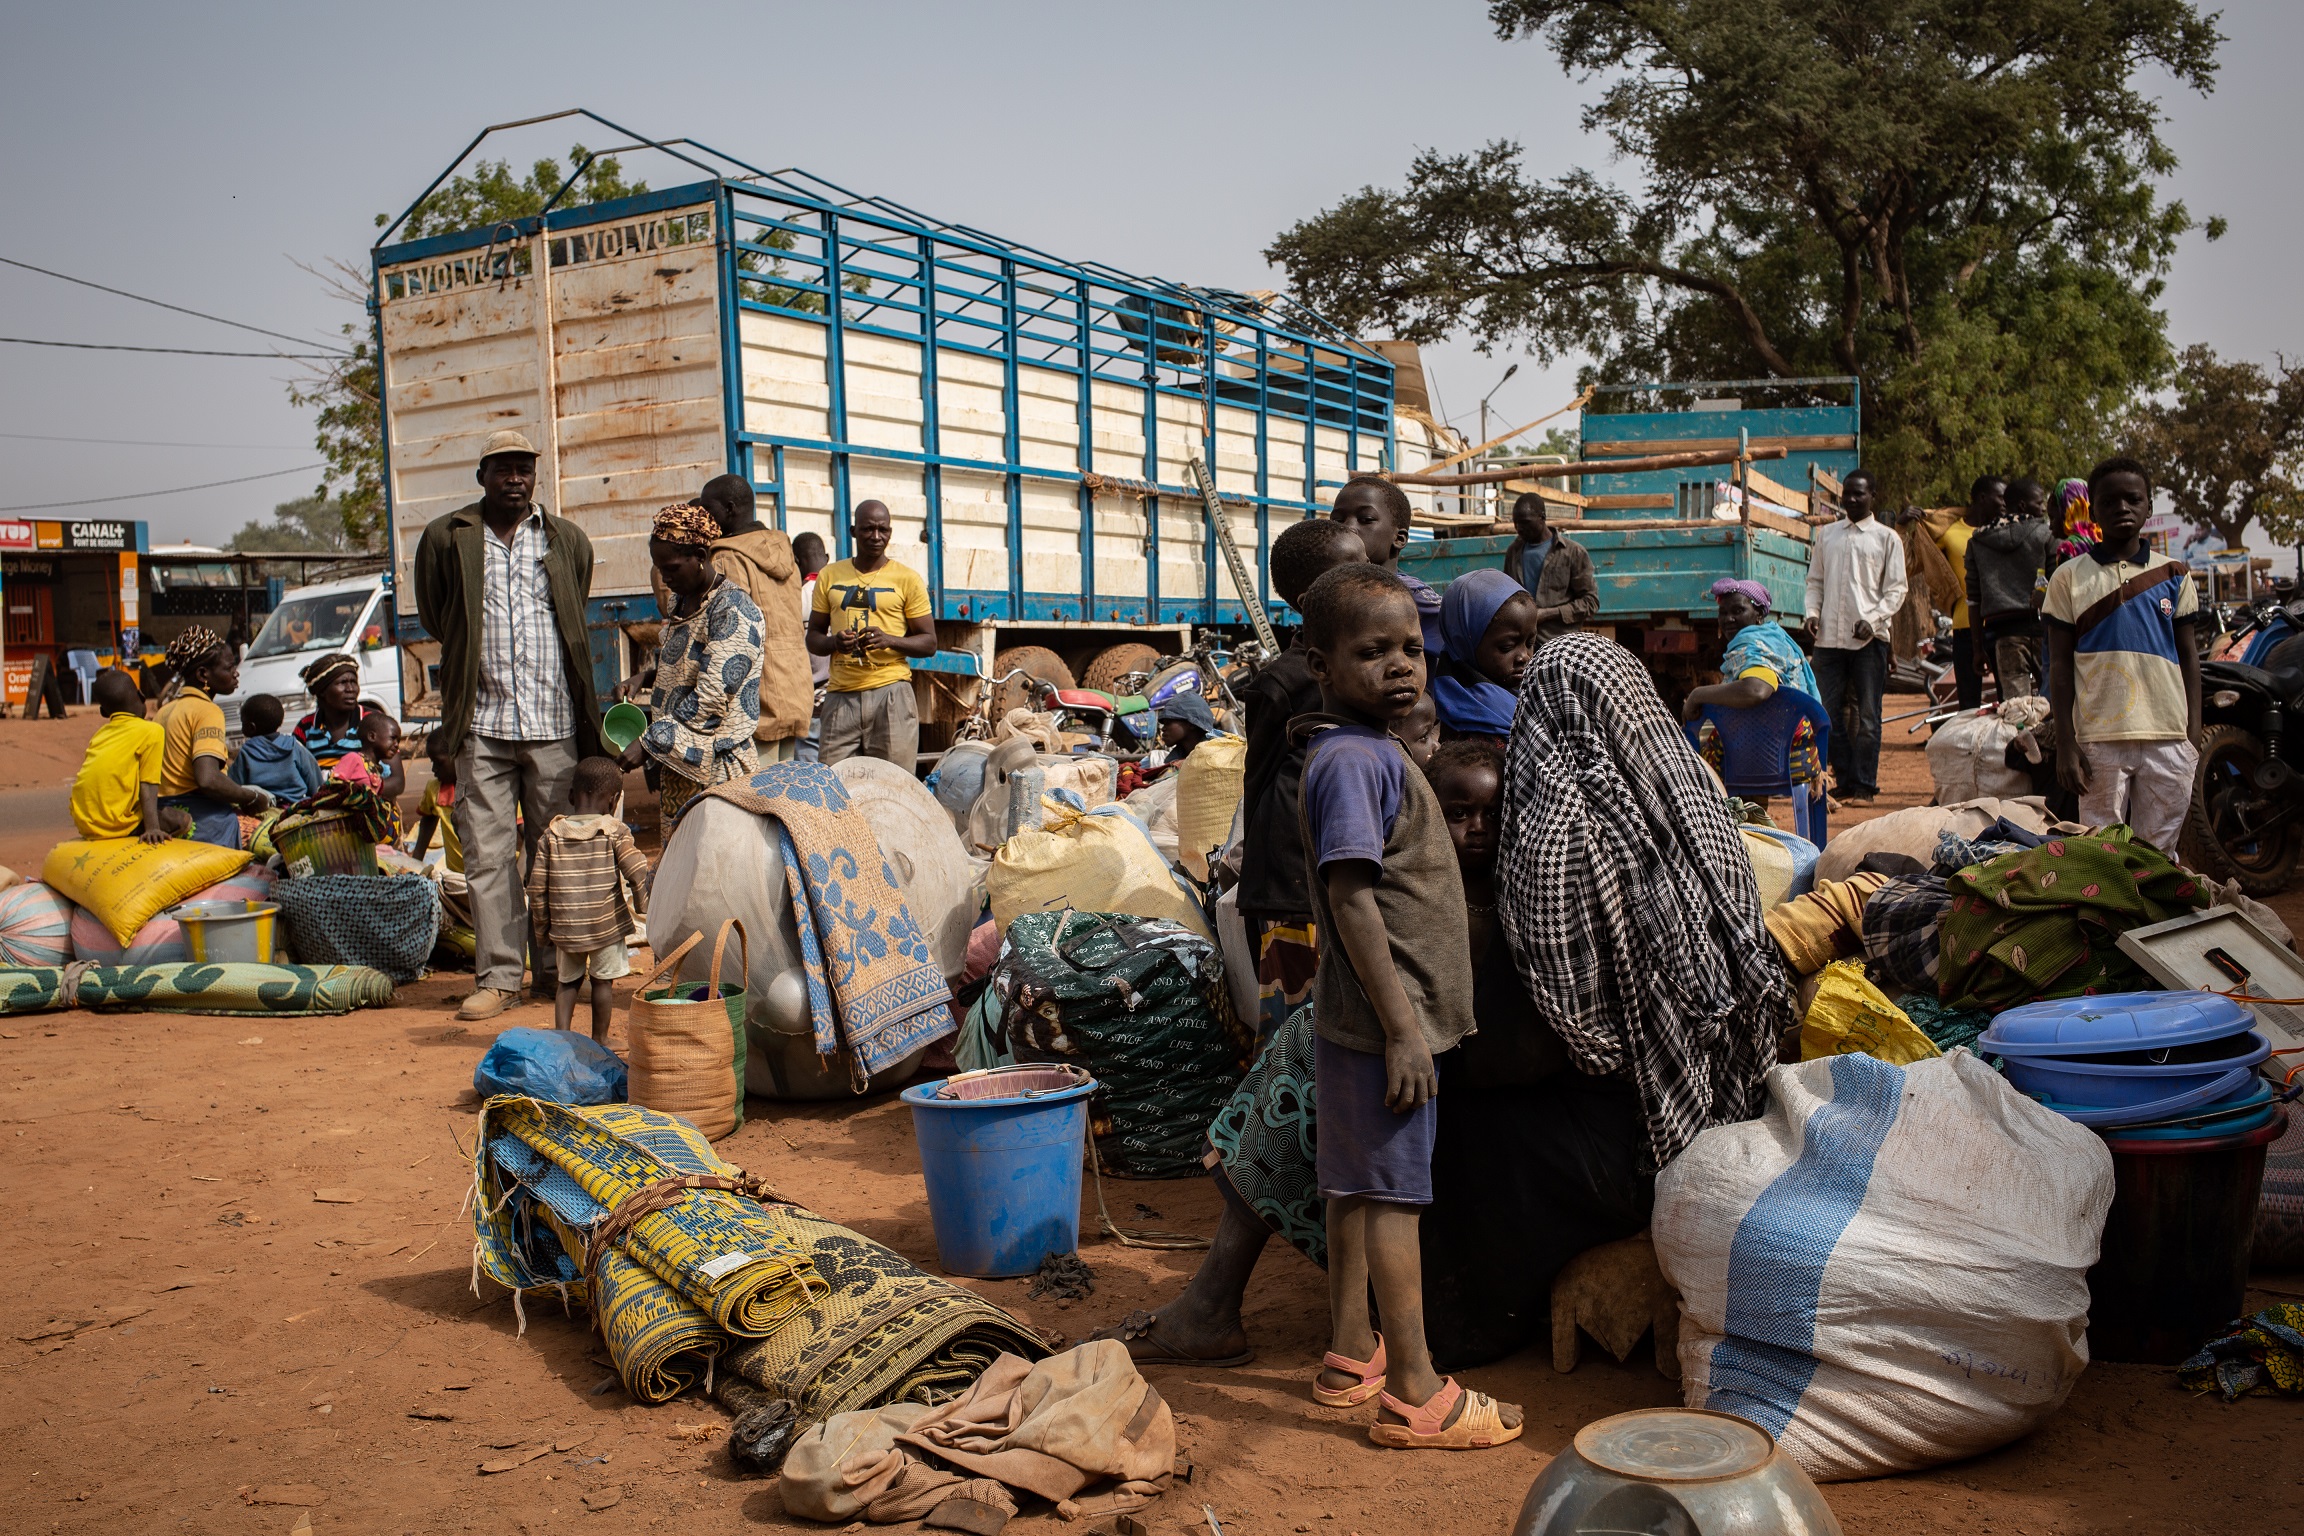 Newly displaced people waiting on the side of the road after they fled attacks in Barsalogho, Burkina Faso